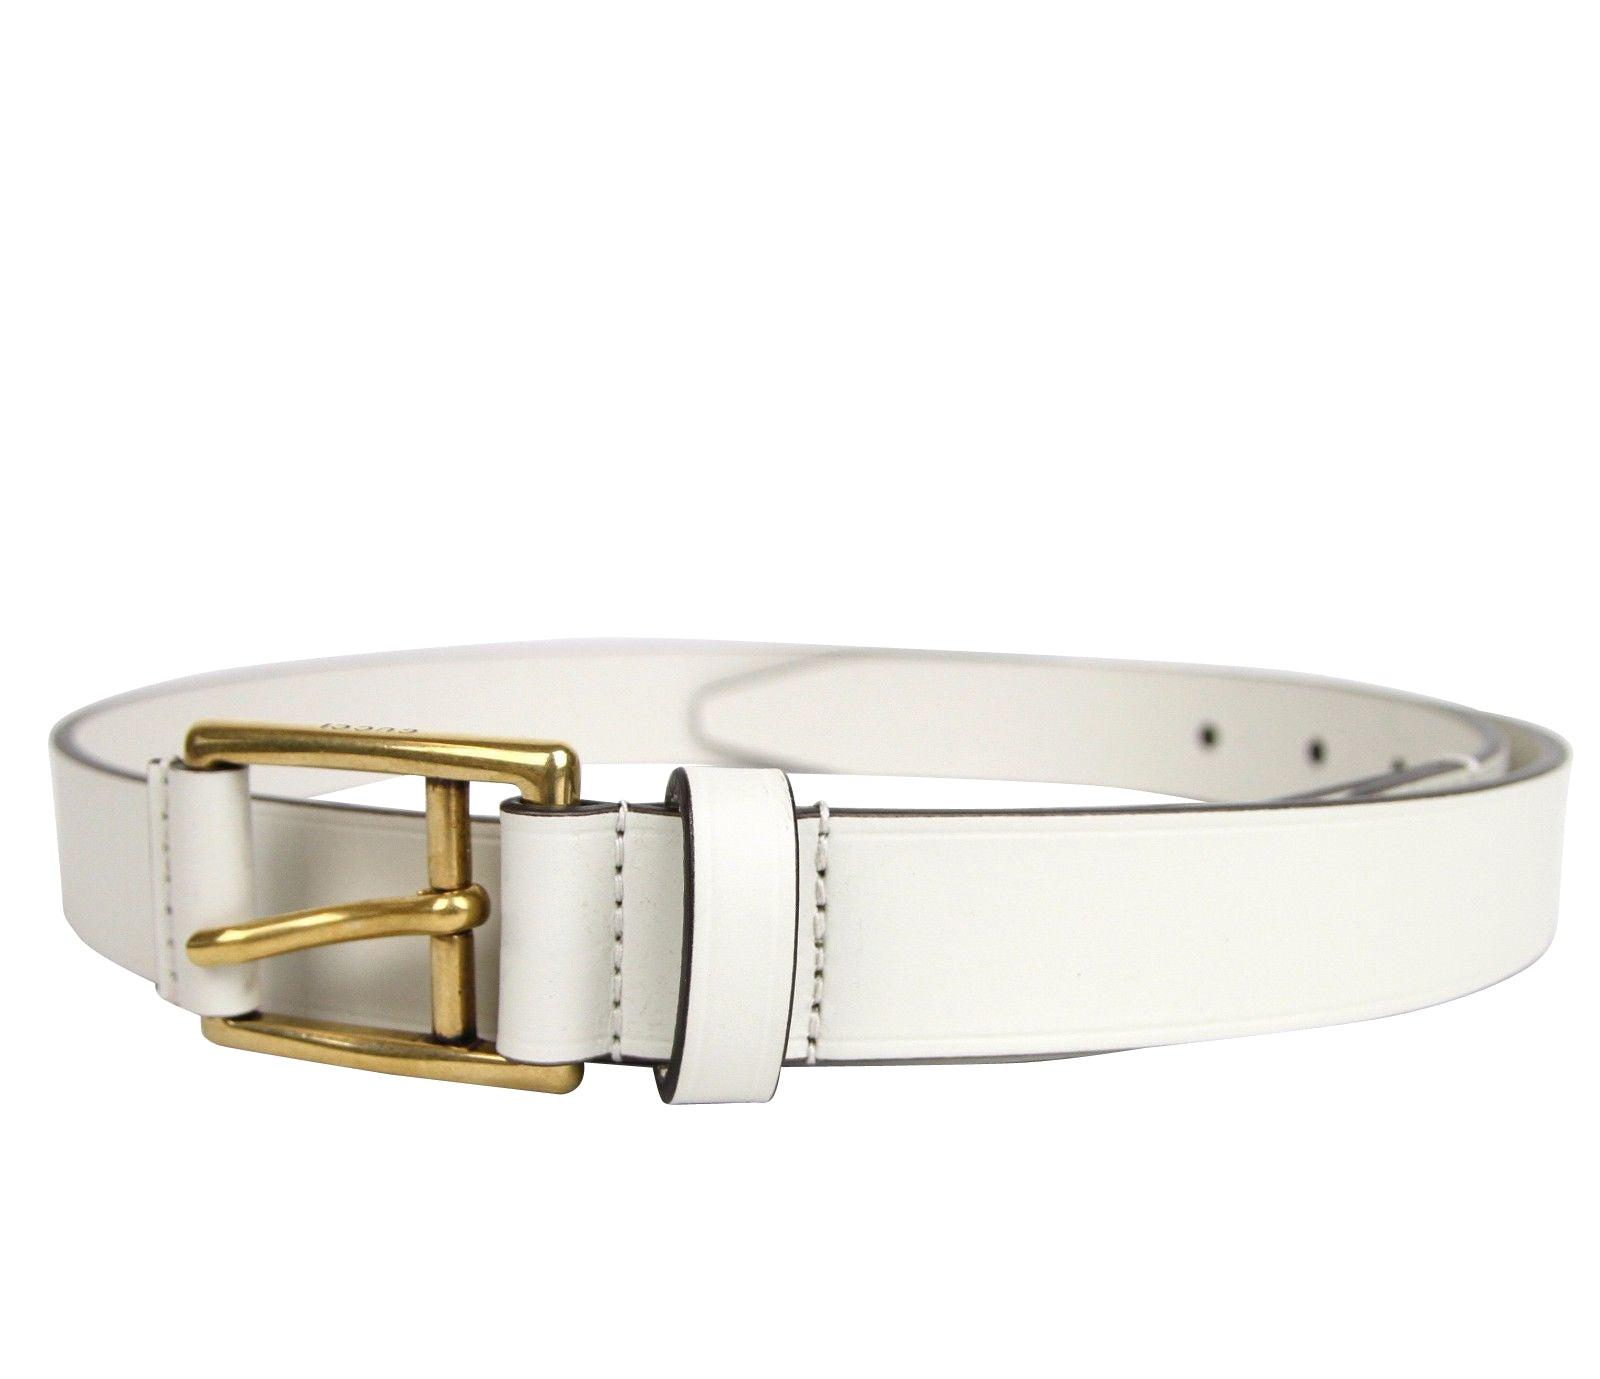 Gucci Feather Leather Belt Gold Buckle Detail 375182 9022 in White 